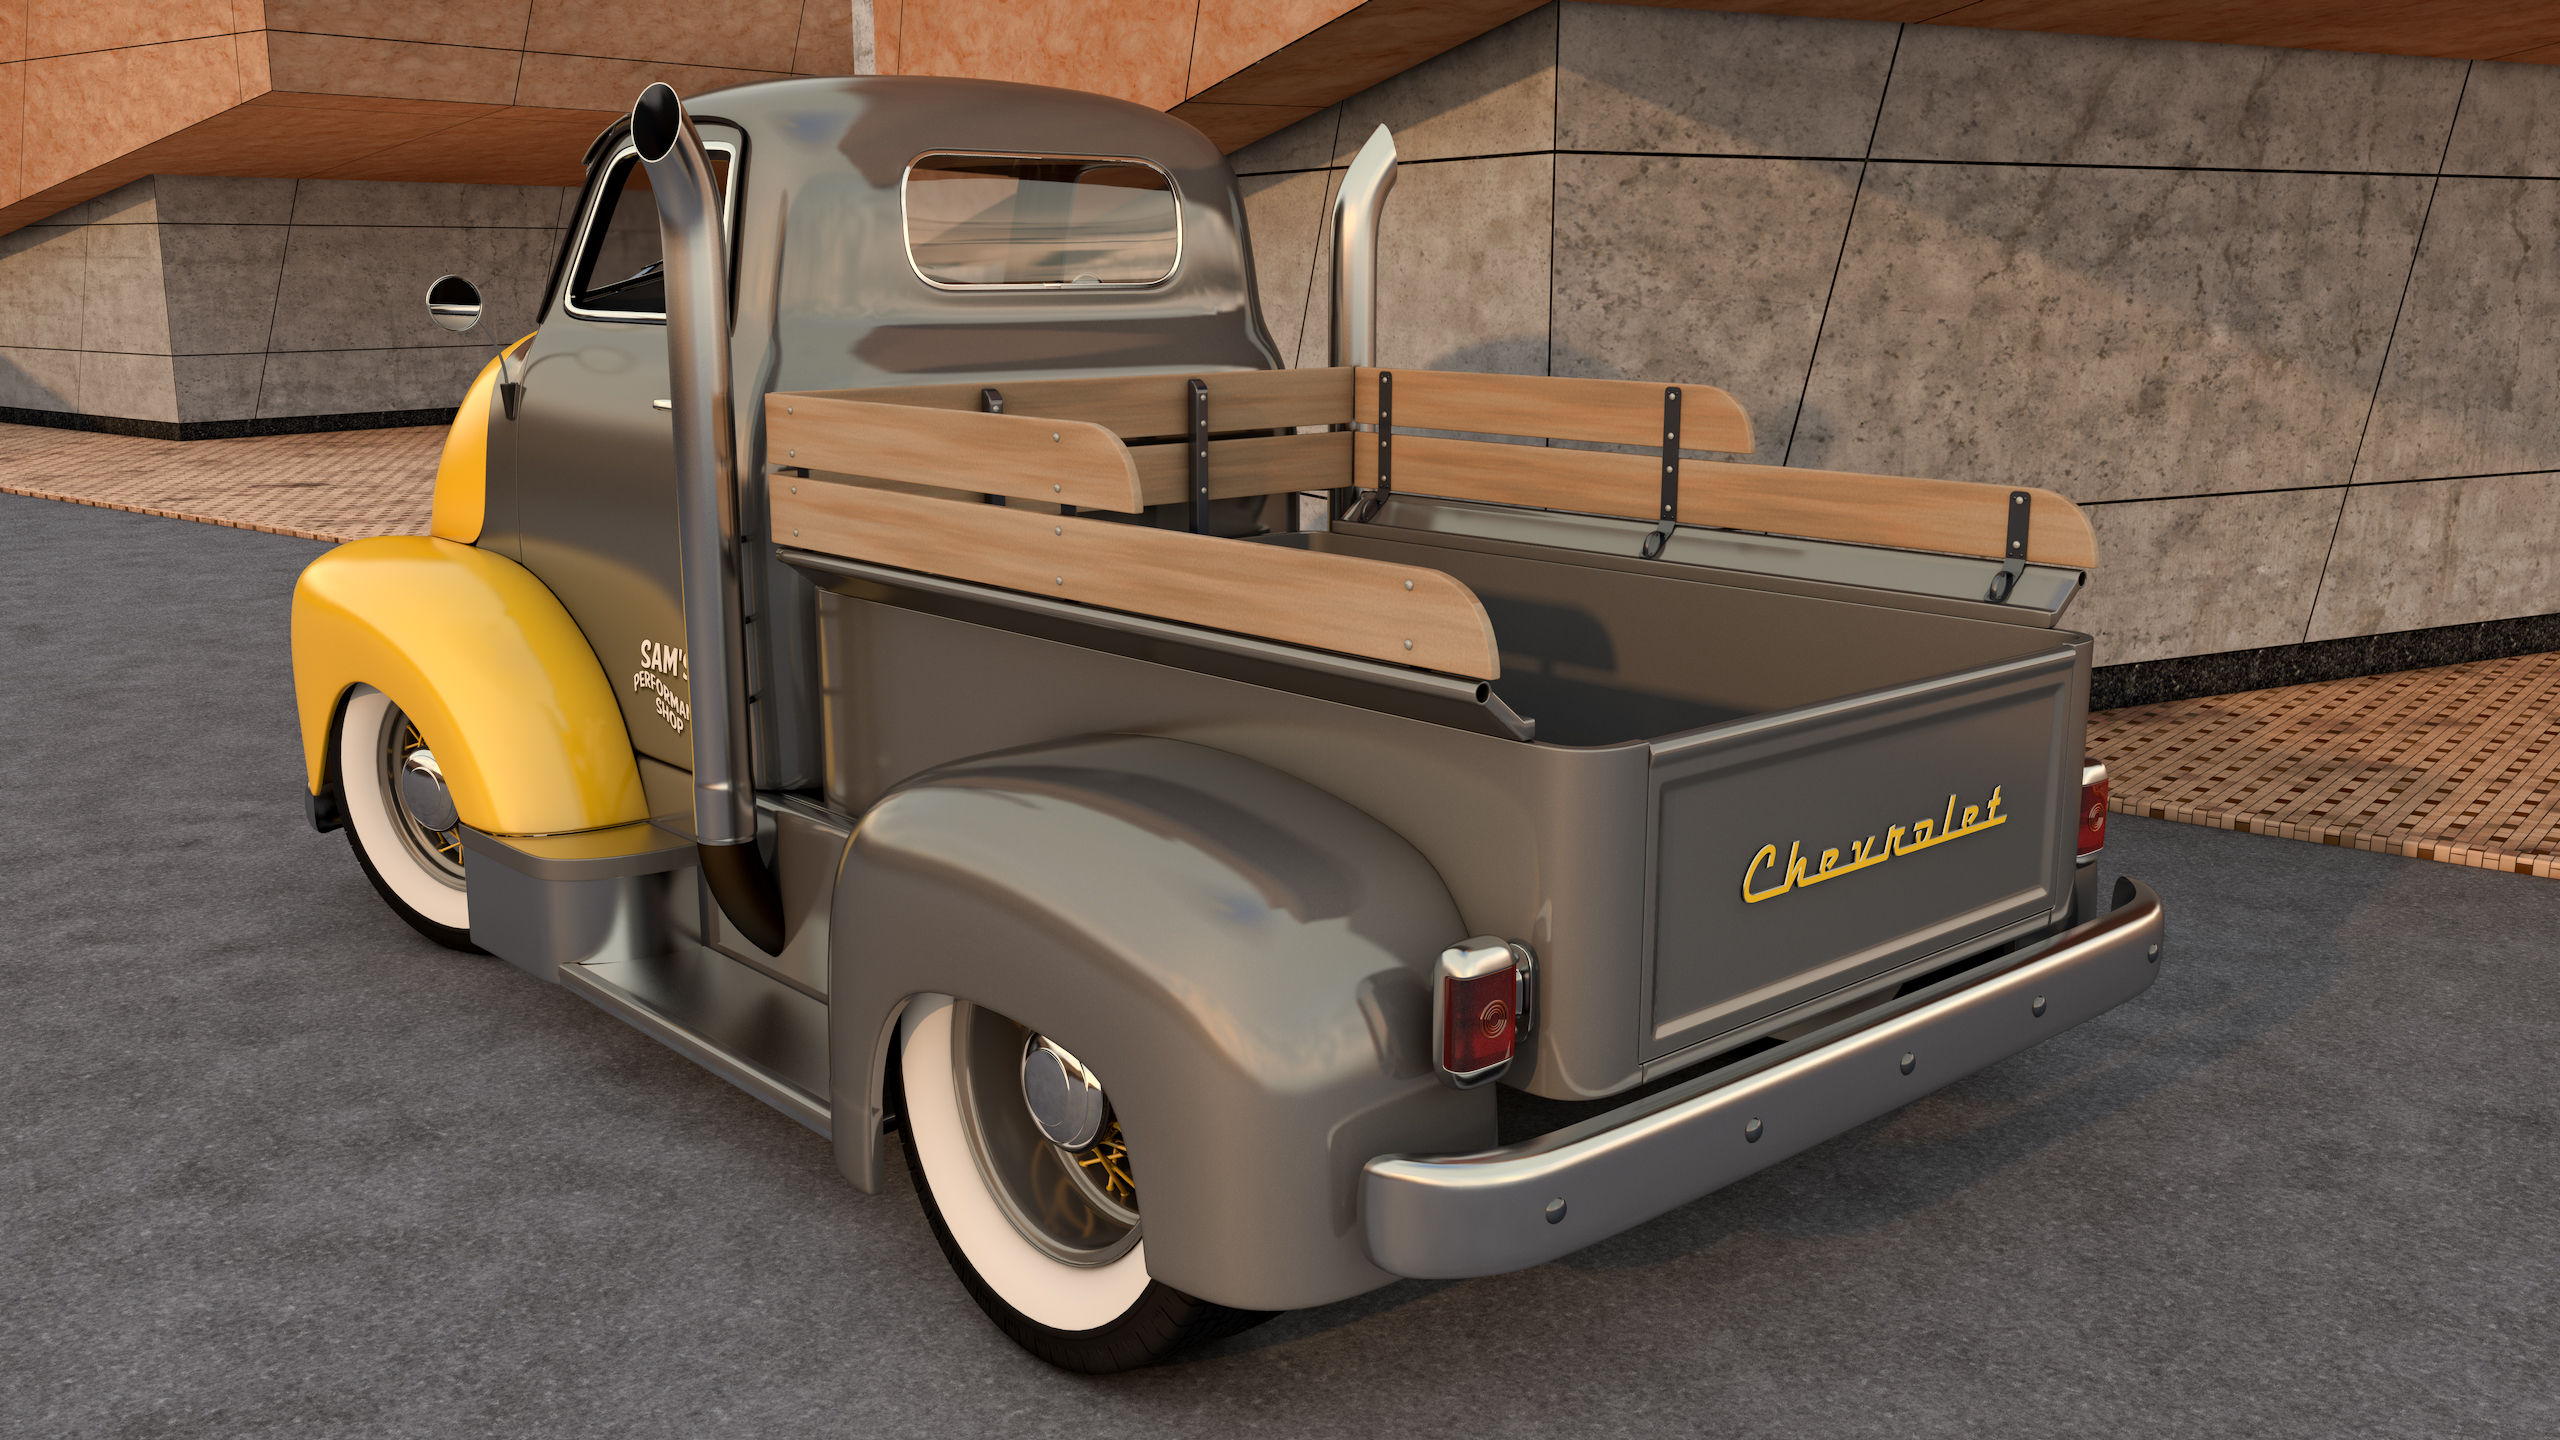 Chevrolet COE Truck by SamCurry on DeviantArt